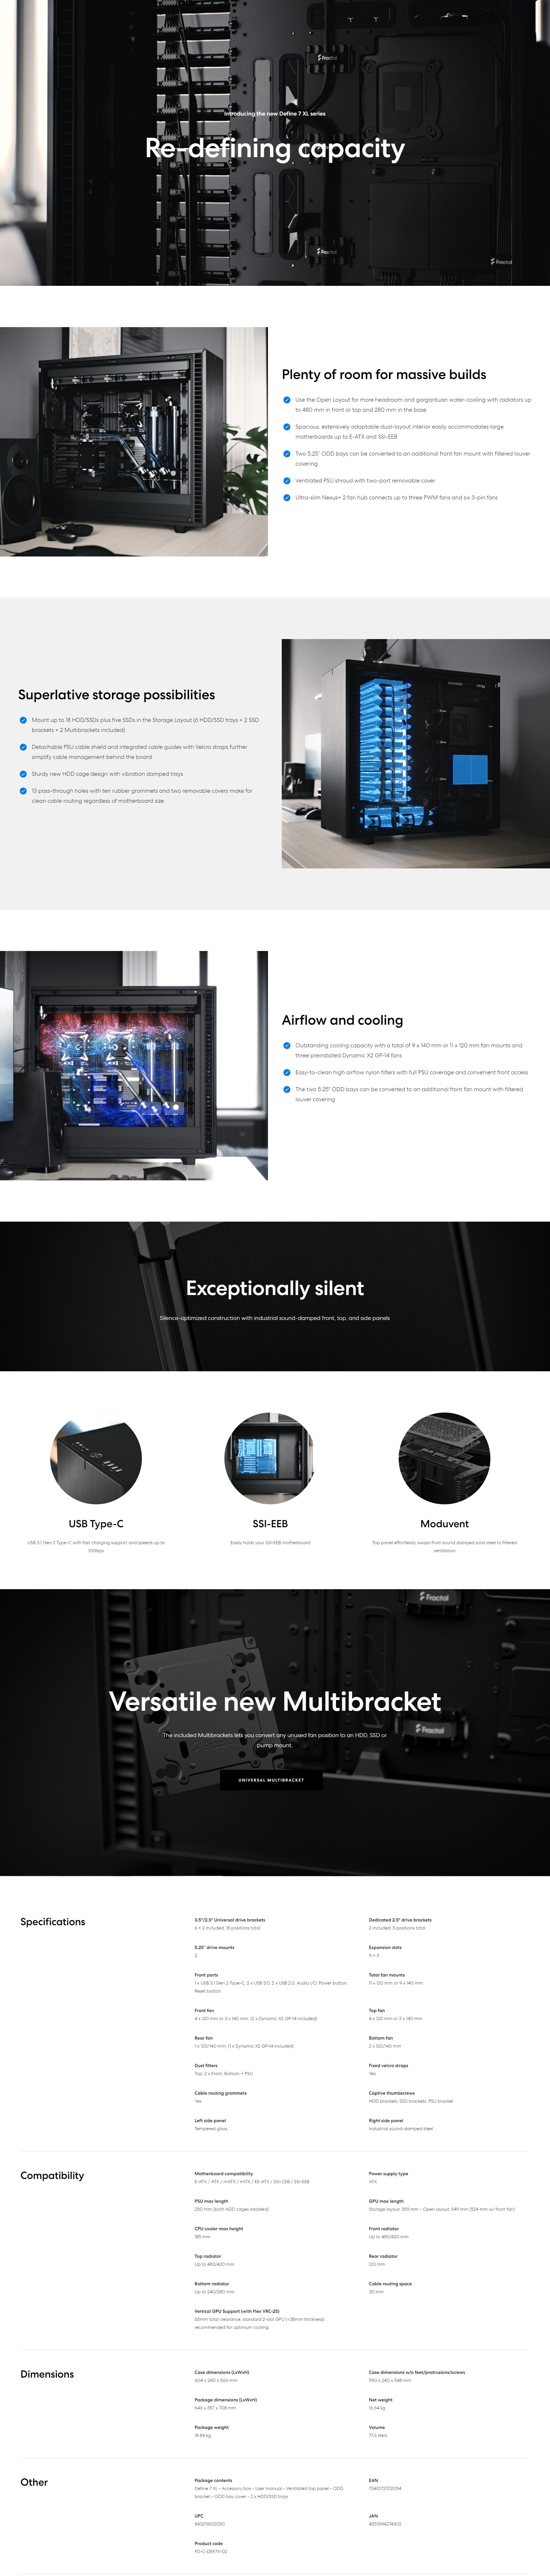 A large marketing image providing additional information about the product Fractal Design Define 7 XL TG Light Tint Full Tower Case - Black - Additional alt info not provided